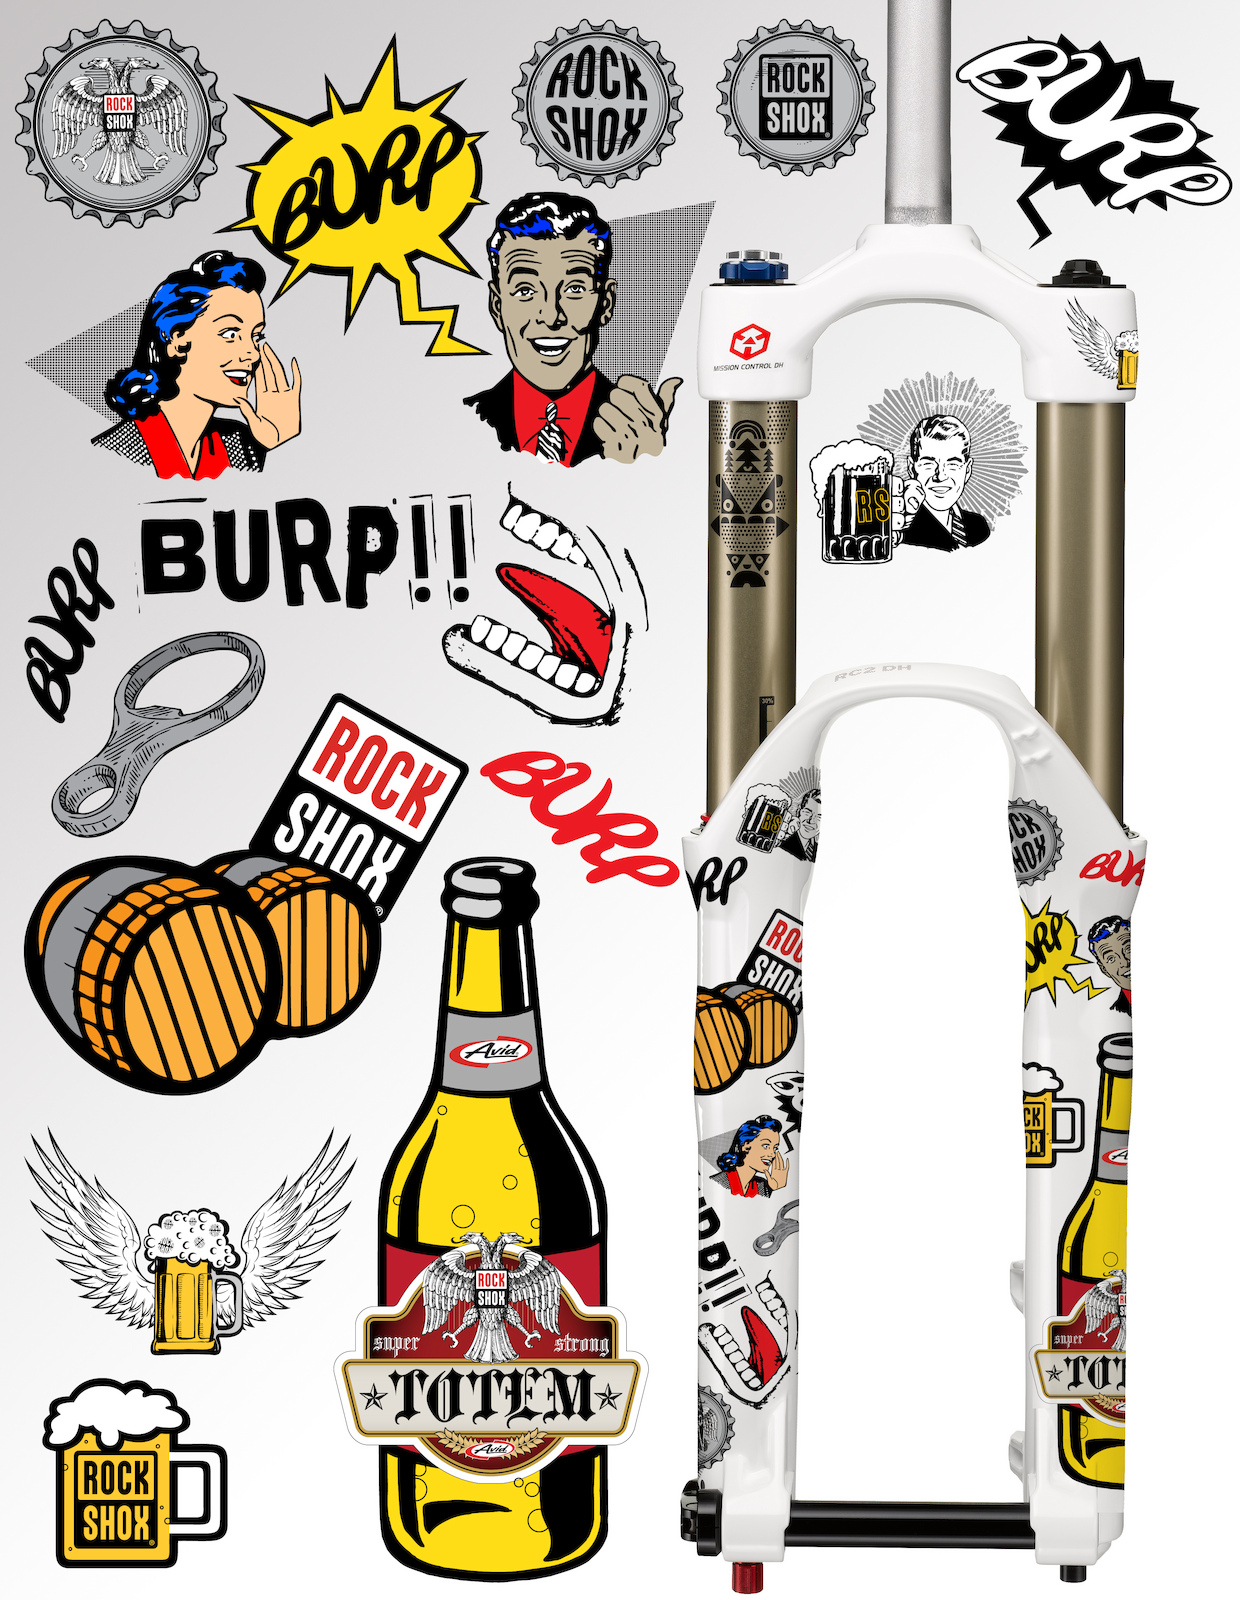 Drik Burp n Ride - Hopefully..the next official RockShox Totem Sticker Pack that will show up on cars, bike and helmets across the globe.